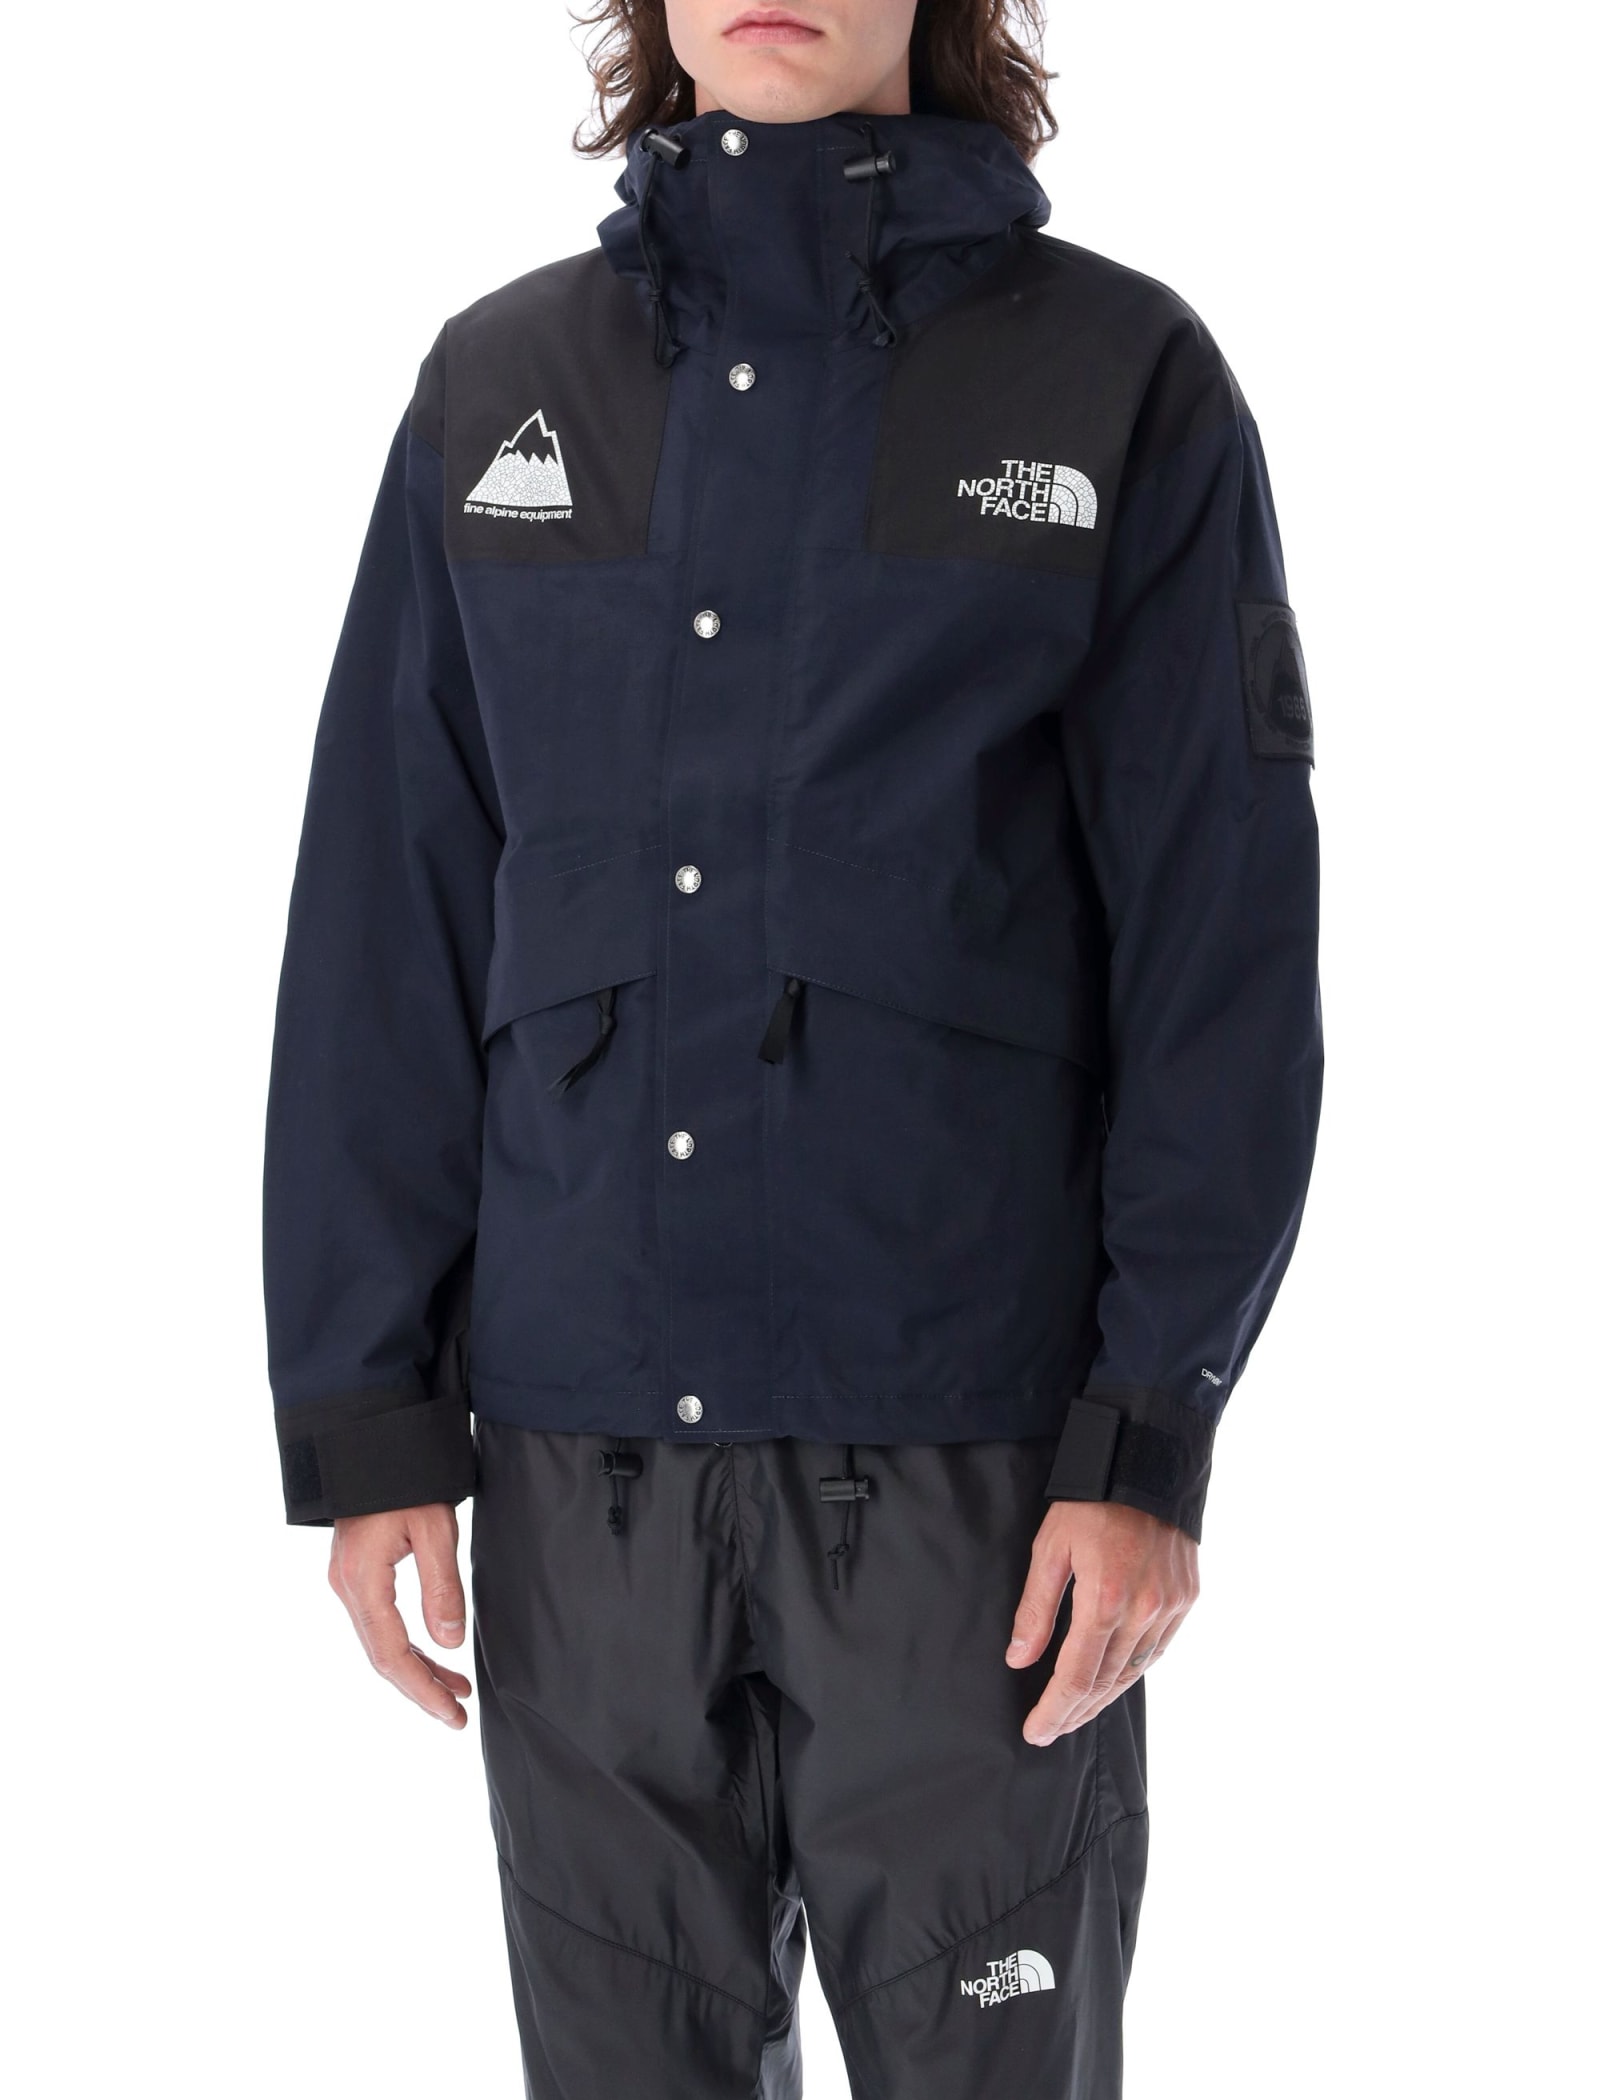 The North Face Origins 86 Mountain Jacket